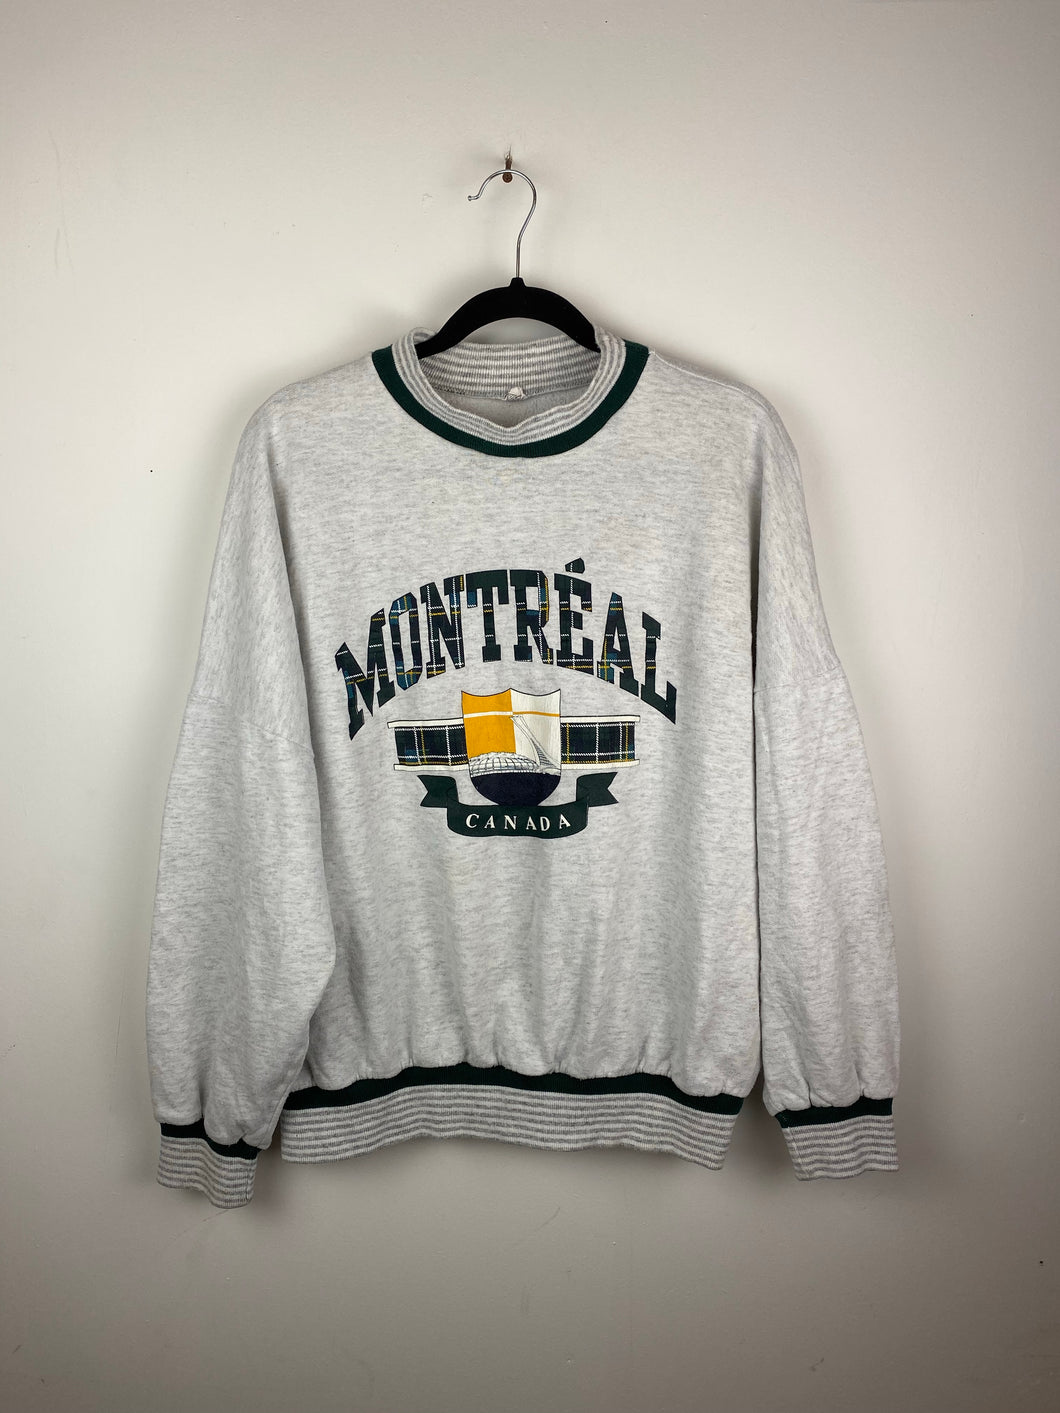 Vintage Montreal crewneck with plaid lettering